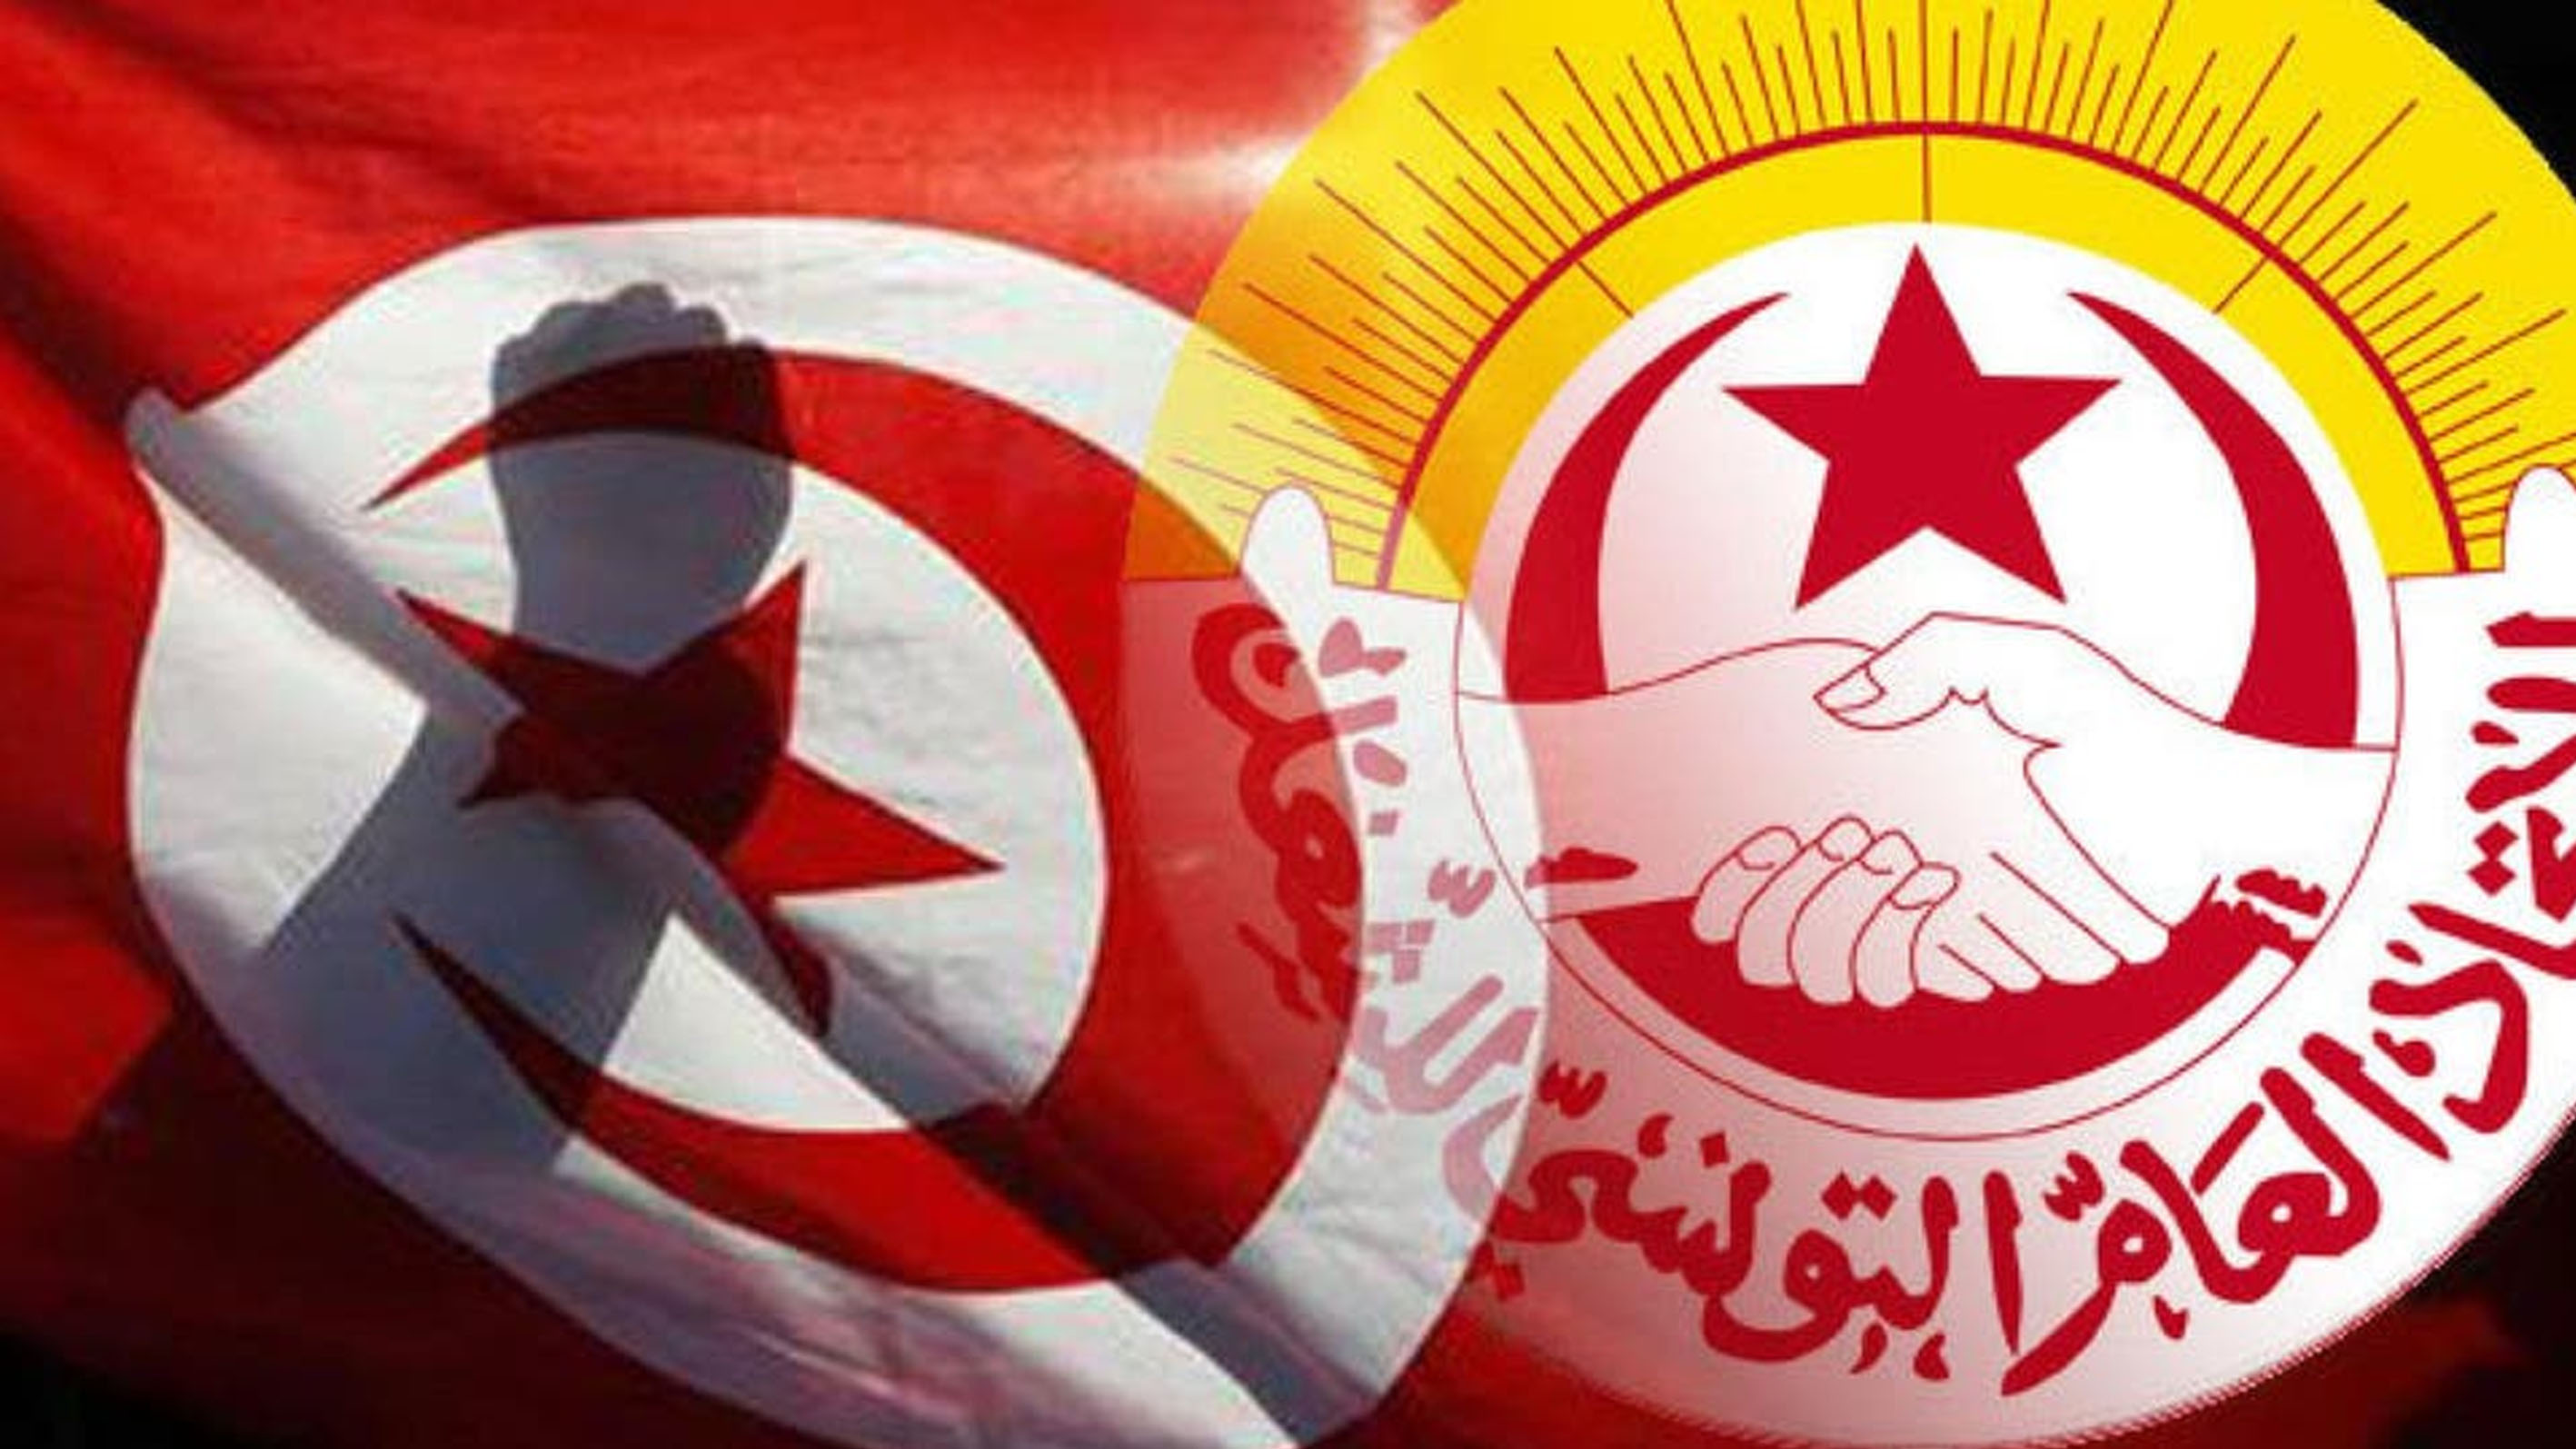 Mrs. Karman calls on Tunisian Labor Union to reject coup measures and side with democracy